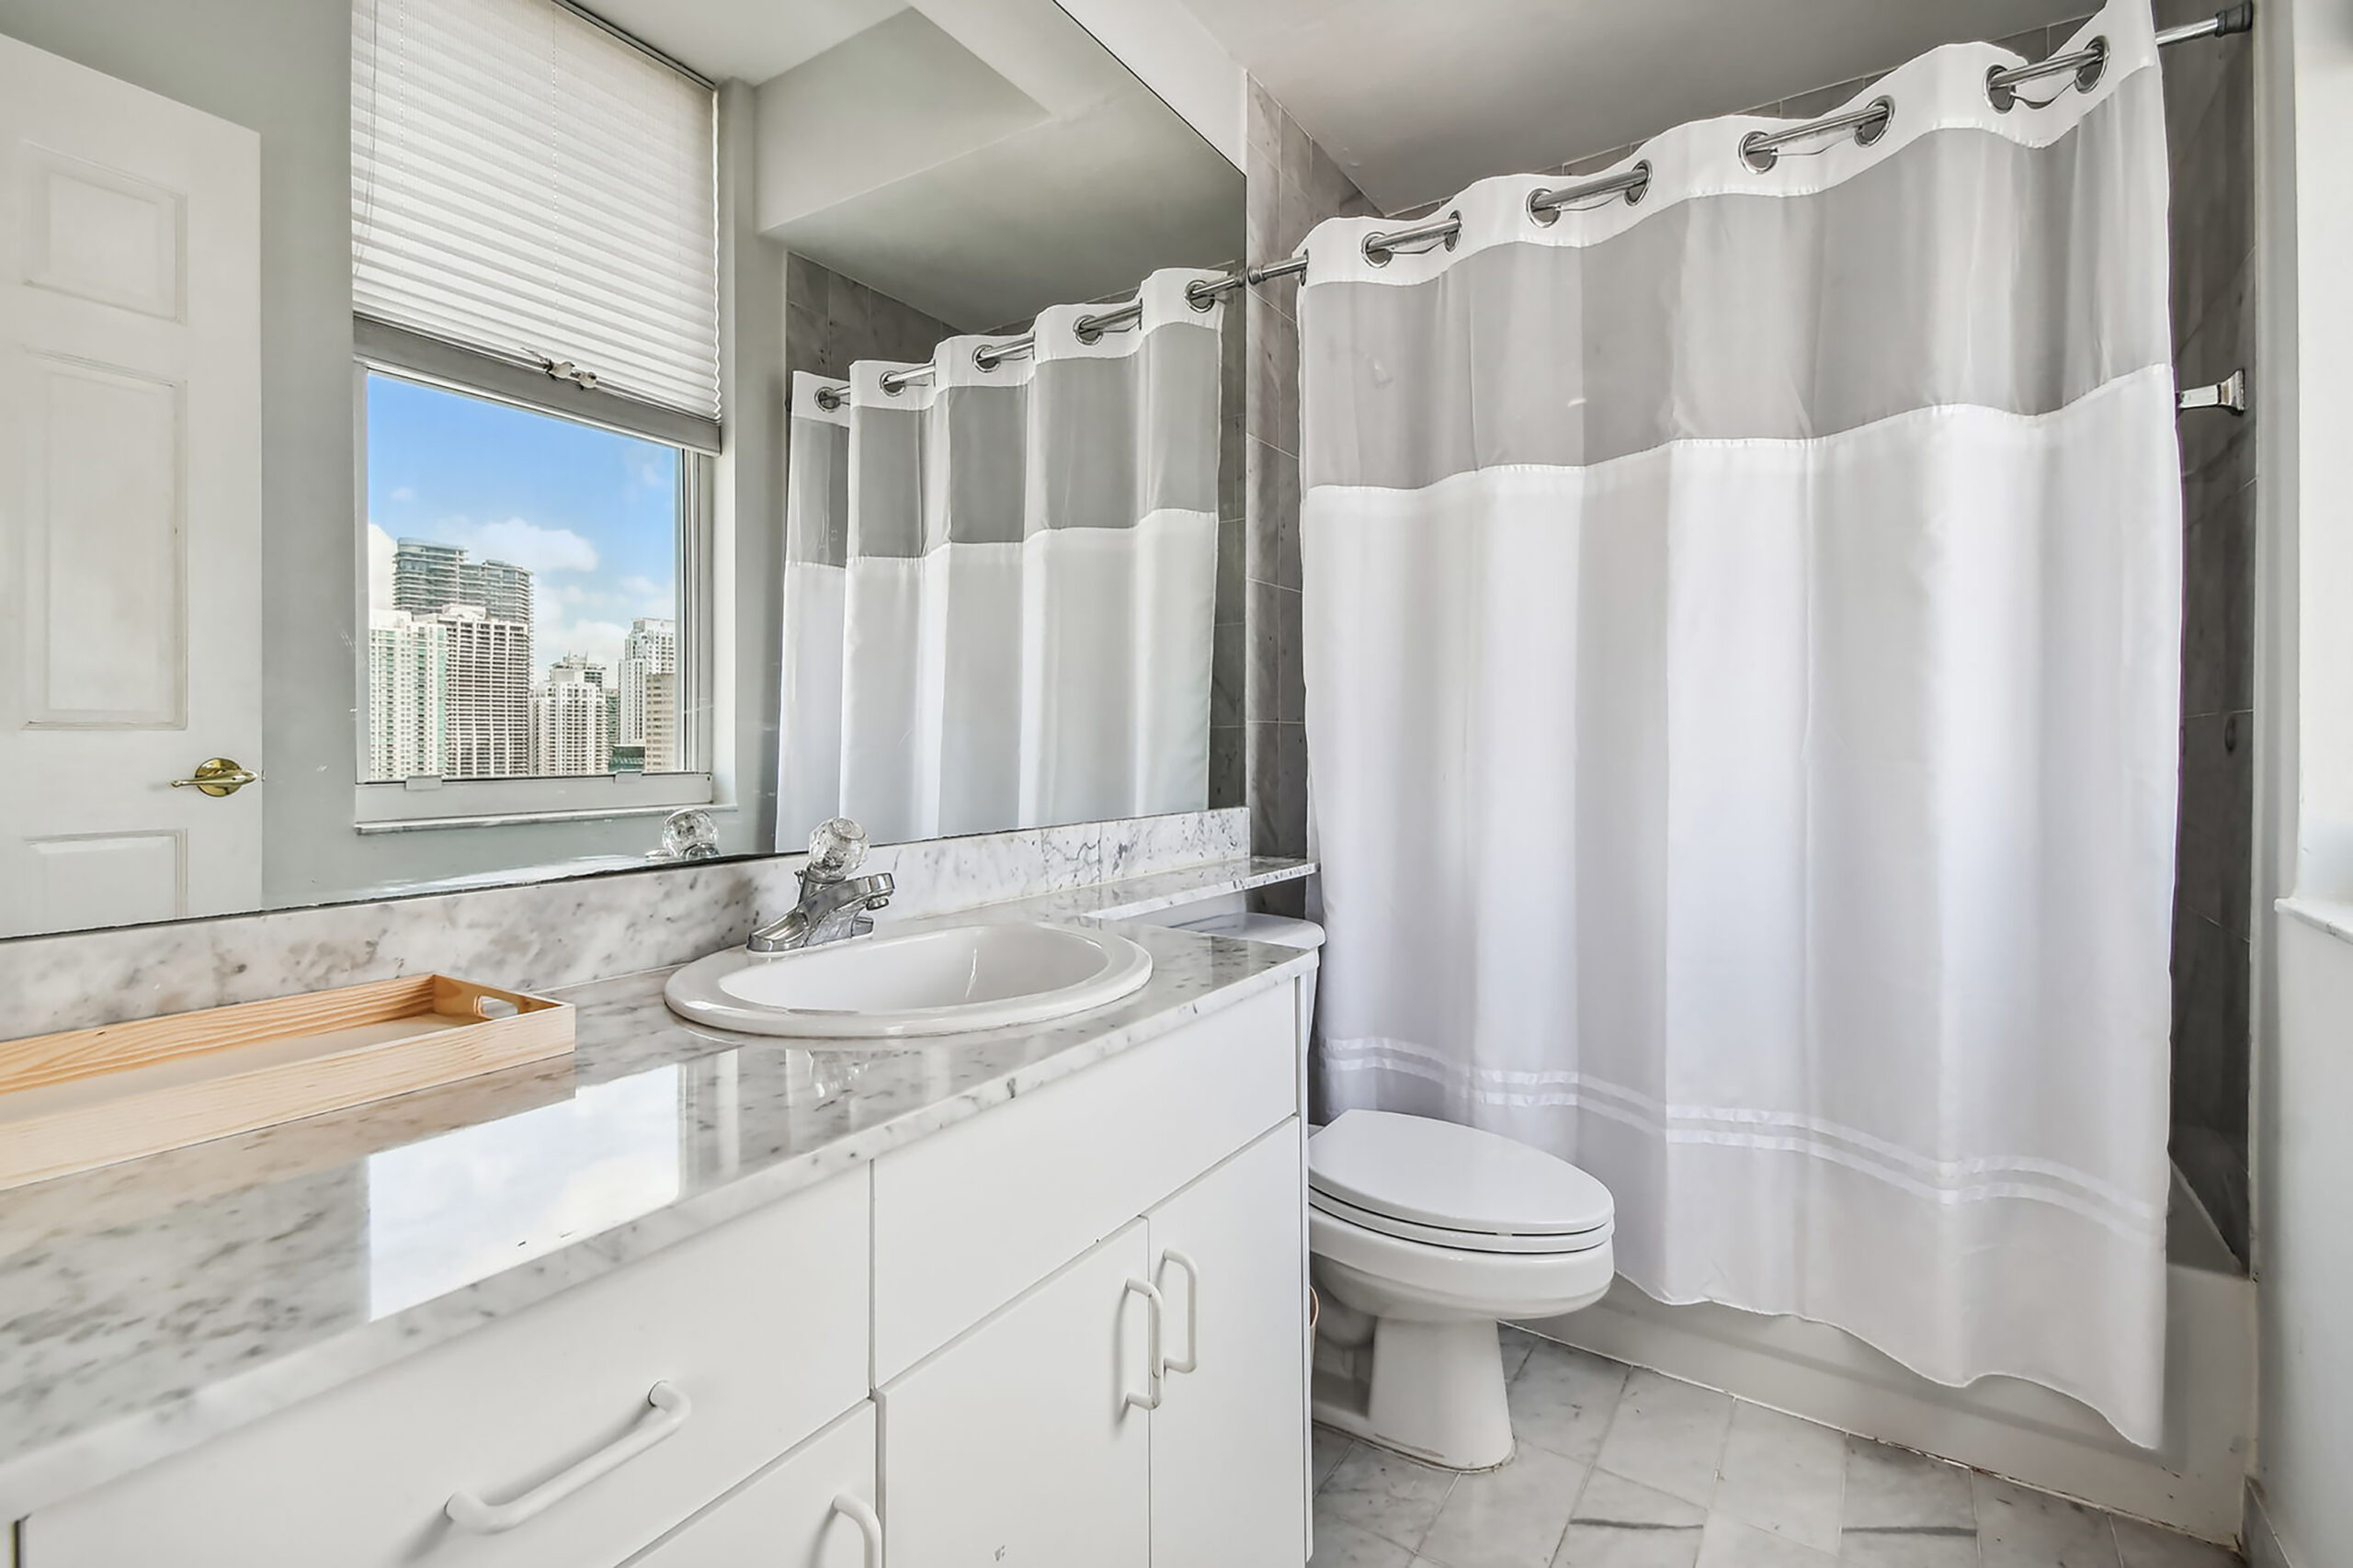 Waterfront Penthouse in Brickell Key, Miami